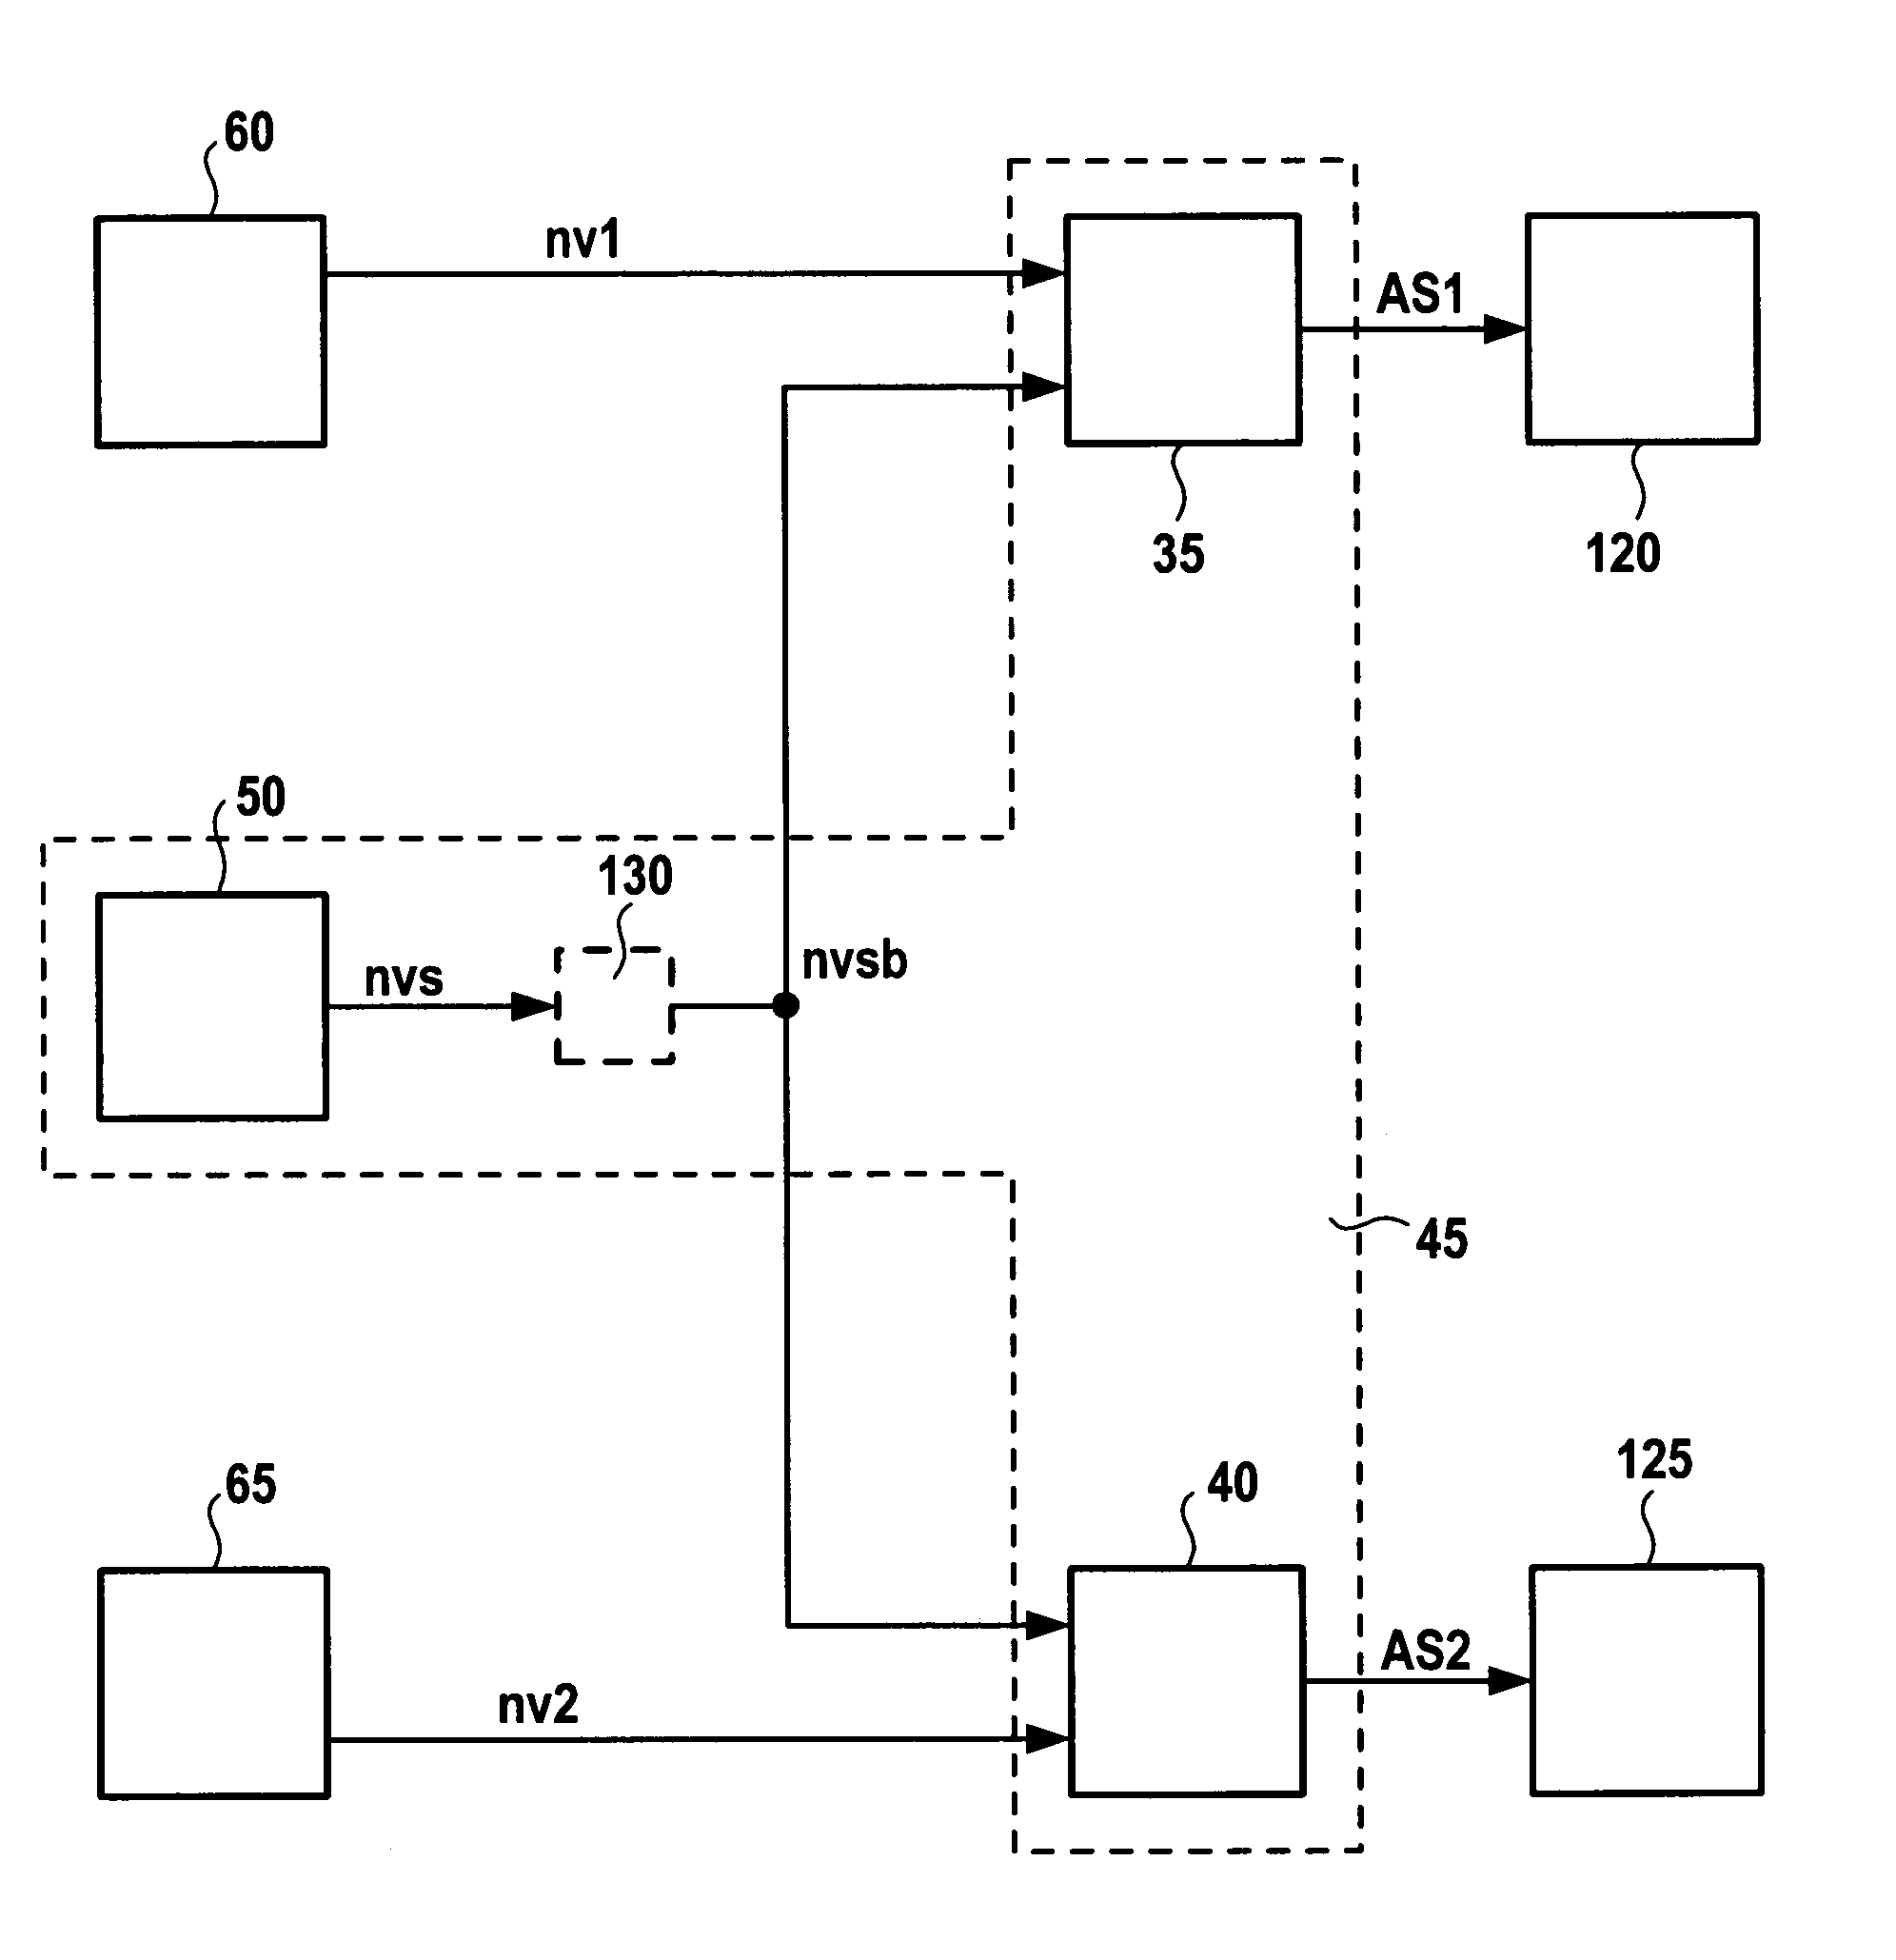 Method and device for operating an internal combustion engine having at least two cylinder banks